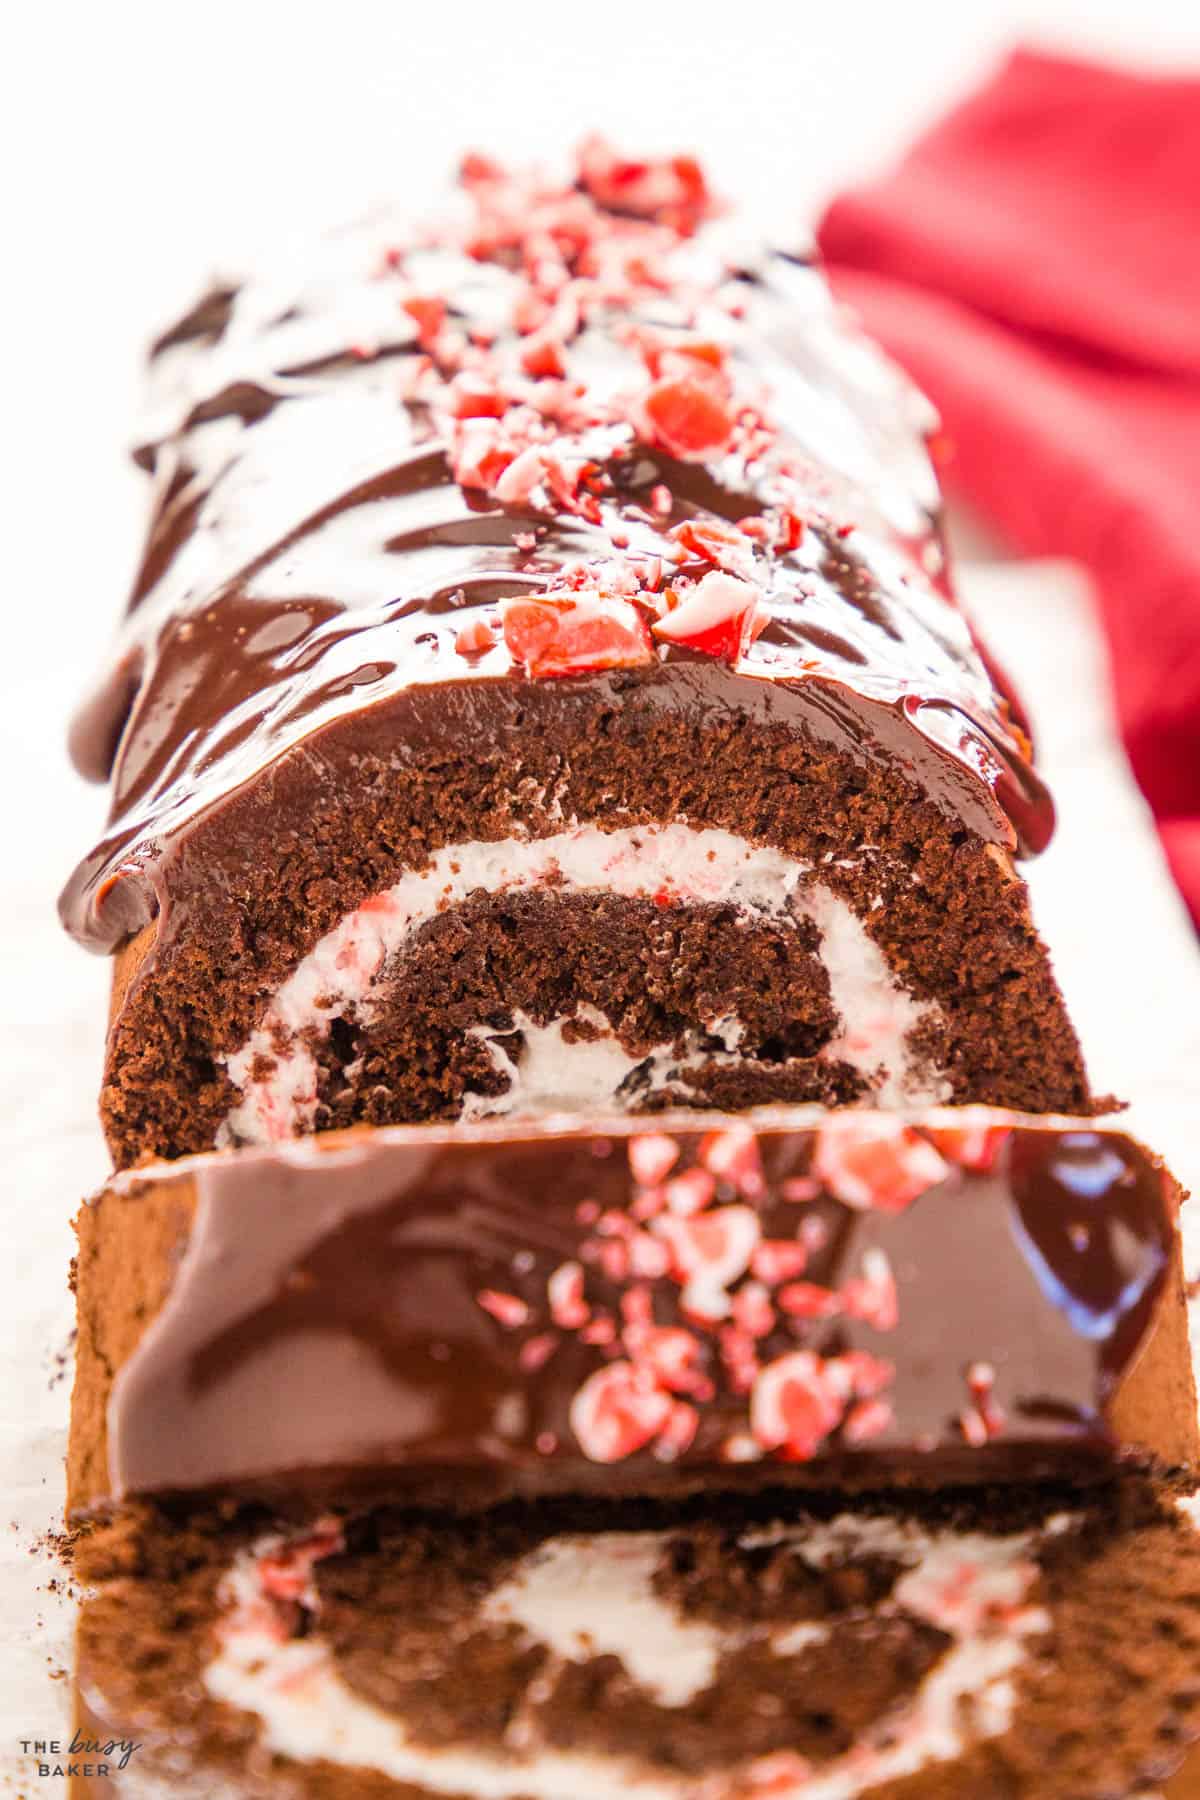 closeup image: chocolate sponge cake with peppermint filling